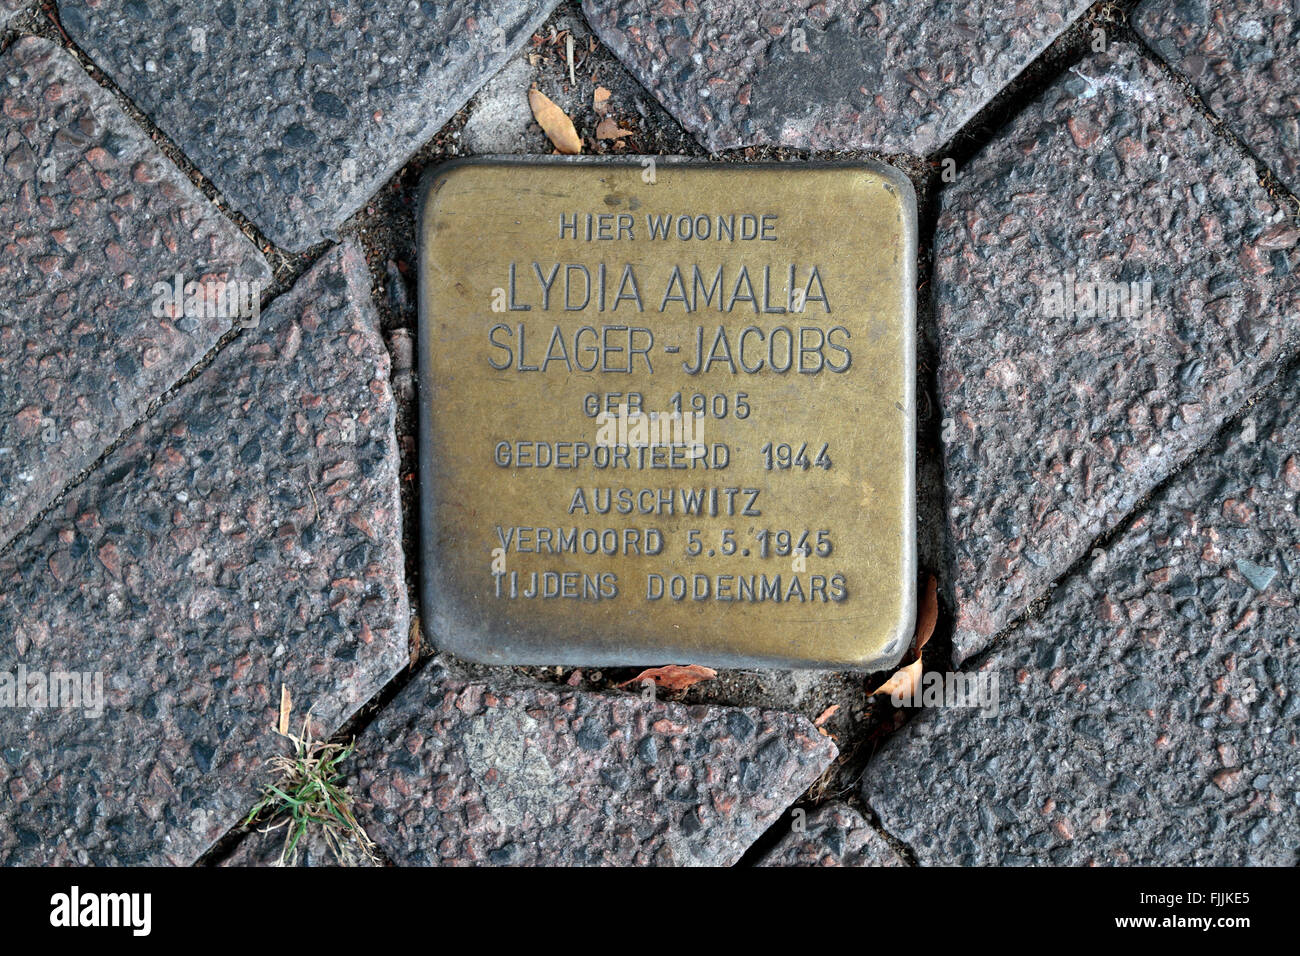 One of the many bronze Stolpersteine or Stumbling Stones pavement memorial markers in Eindhoven, Netherlands. Stock Photo